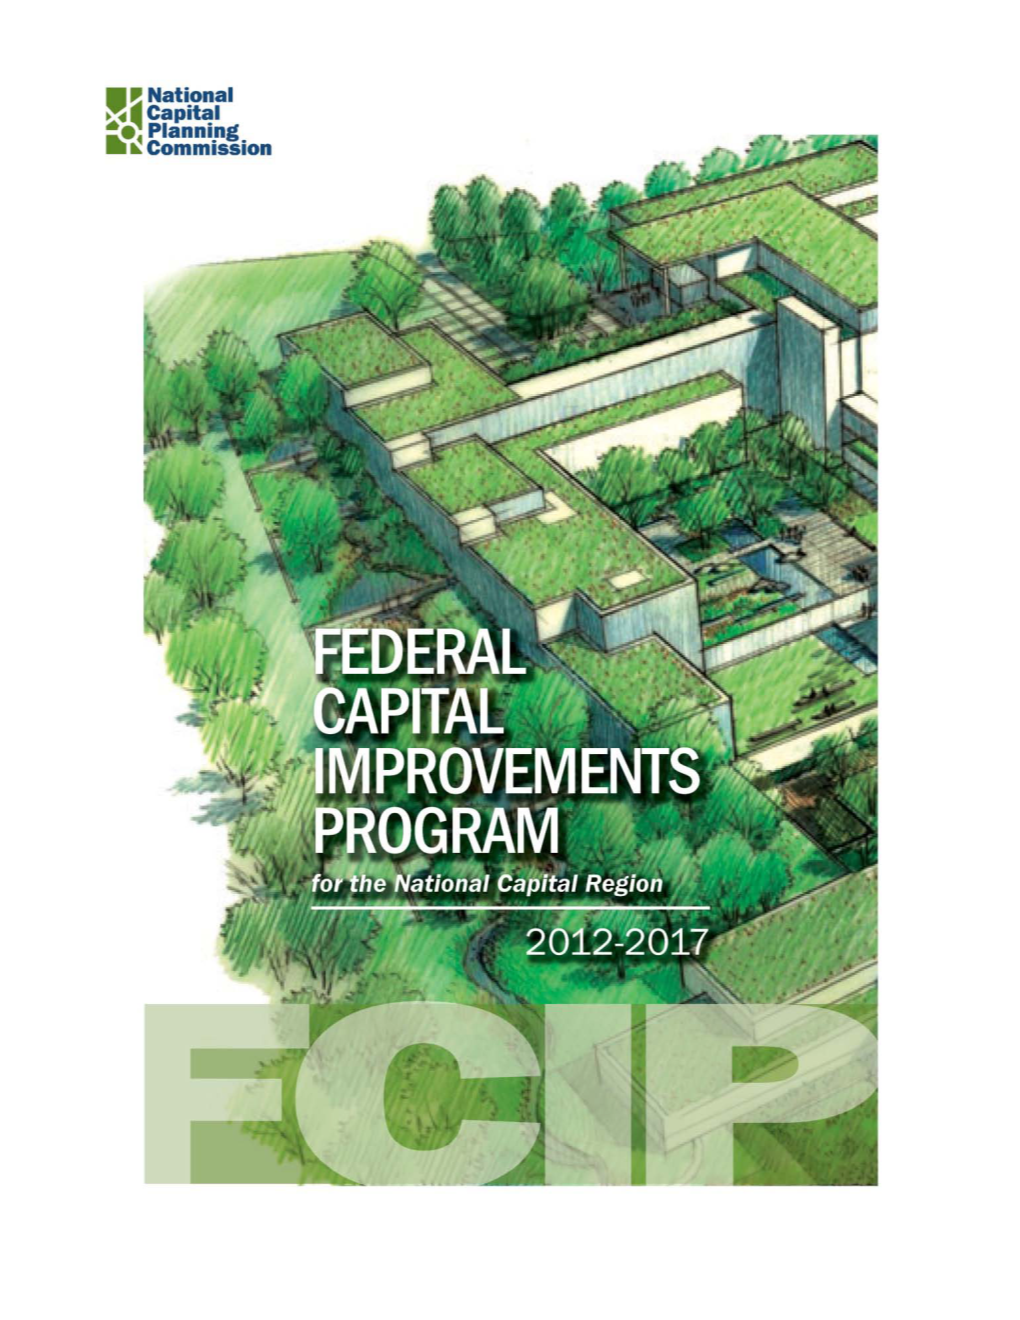 Federal Capital Improvements Program (FCIP) to Help Guide Its Planning Activities in the Region